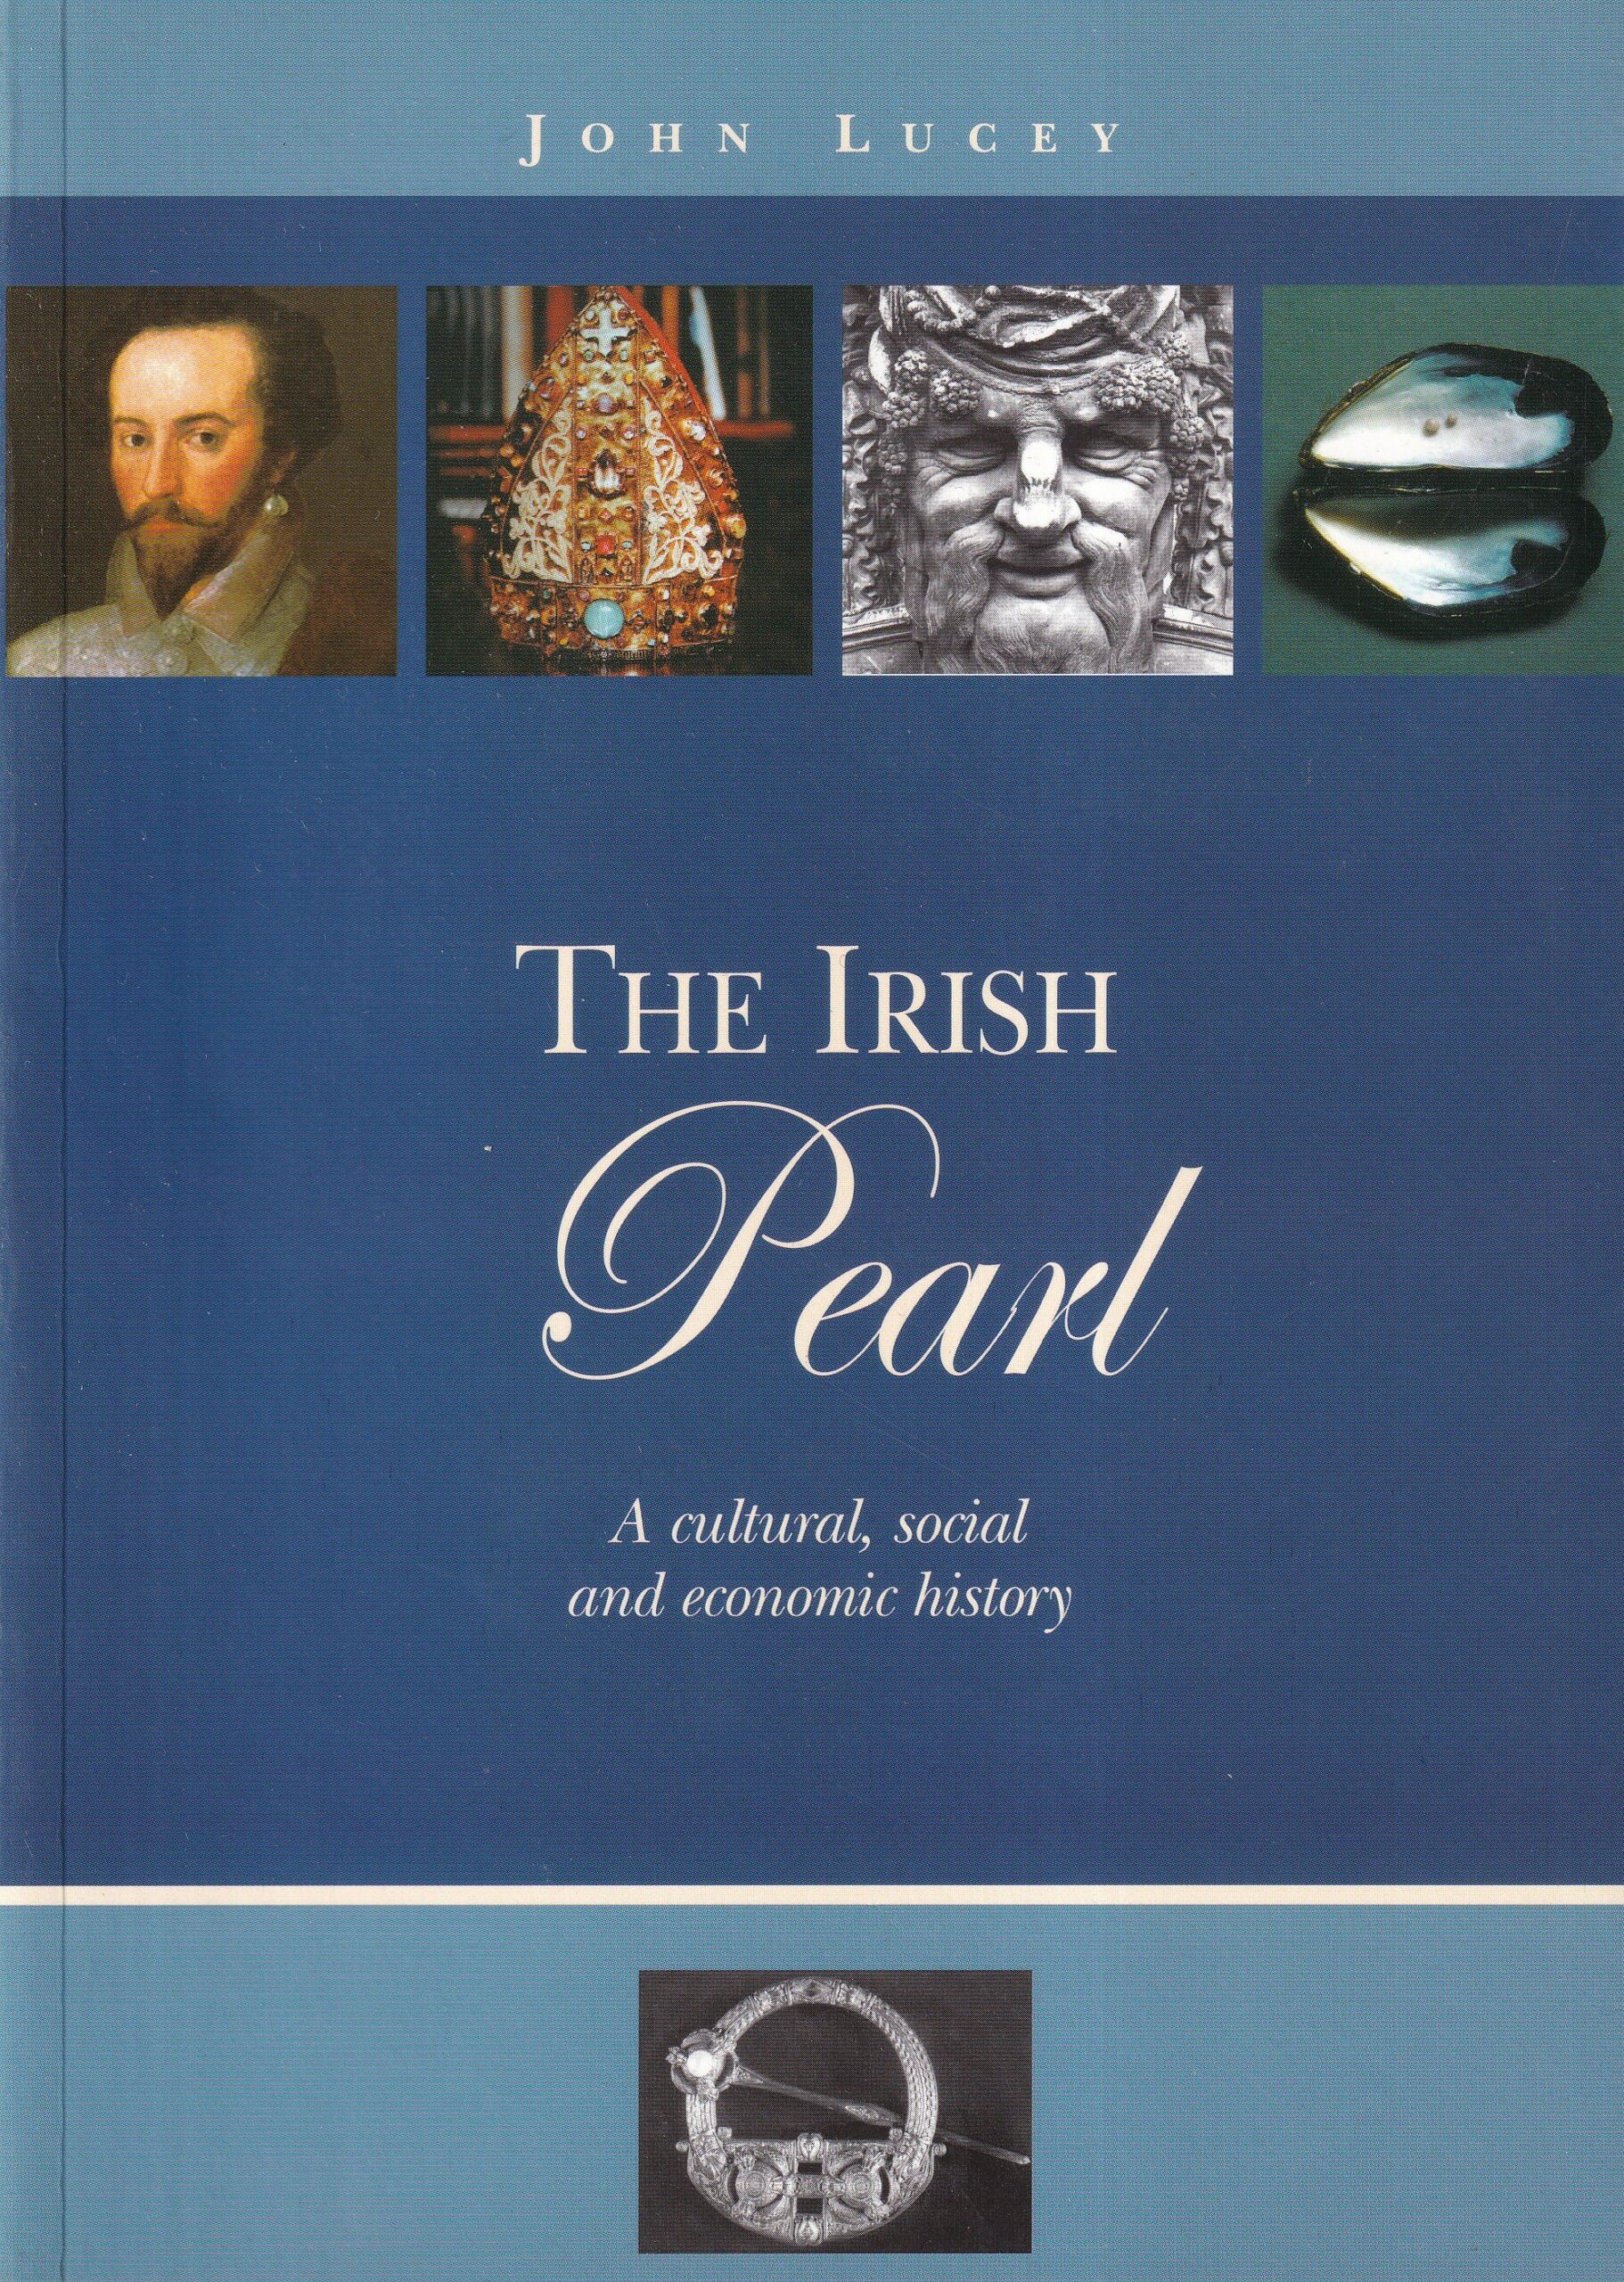 The Irish Pearl: A Cultural, Social and Economic History | John Lucey | Charlie Byrne's